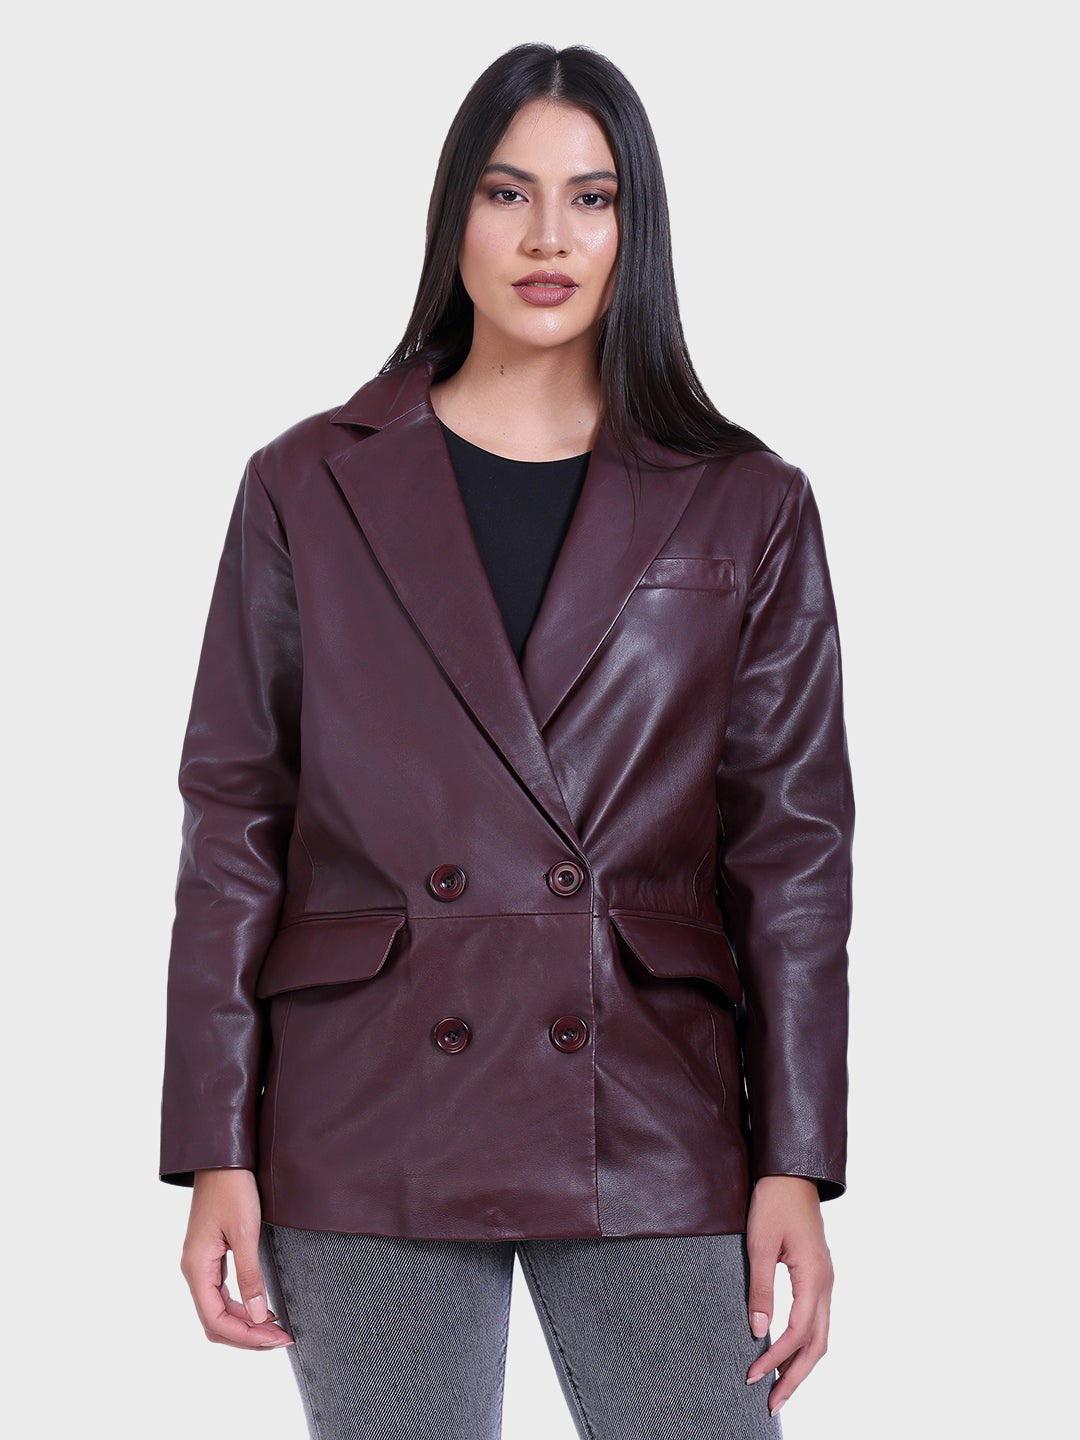 Justanned Chianti Flap Leather Jacket